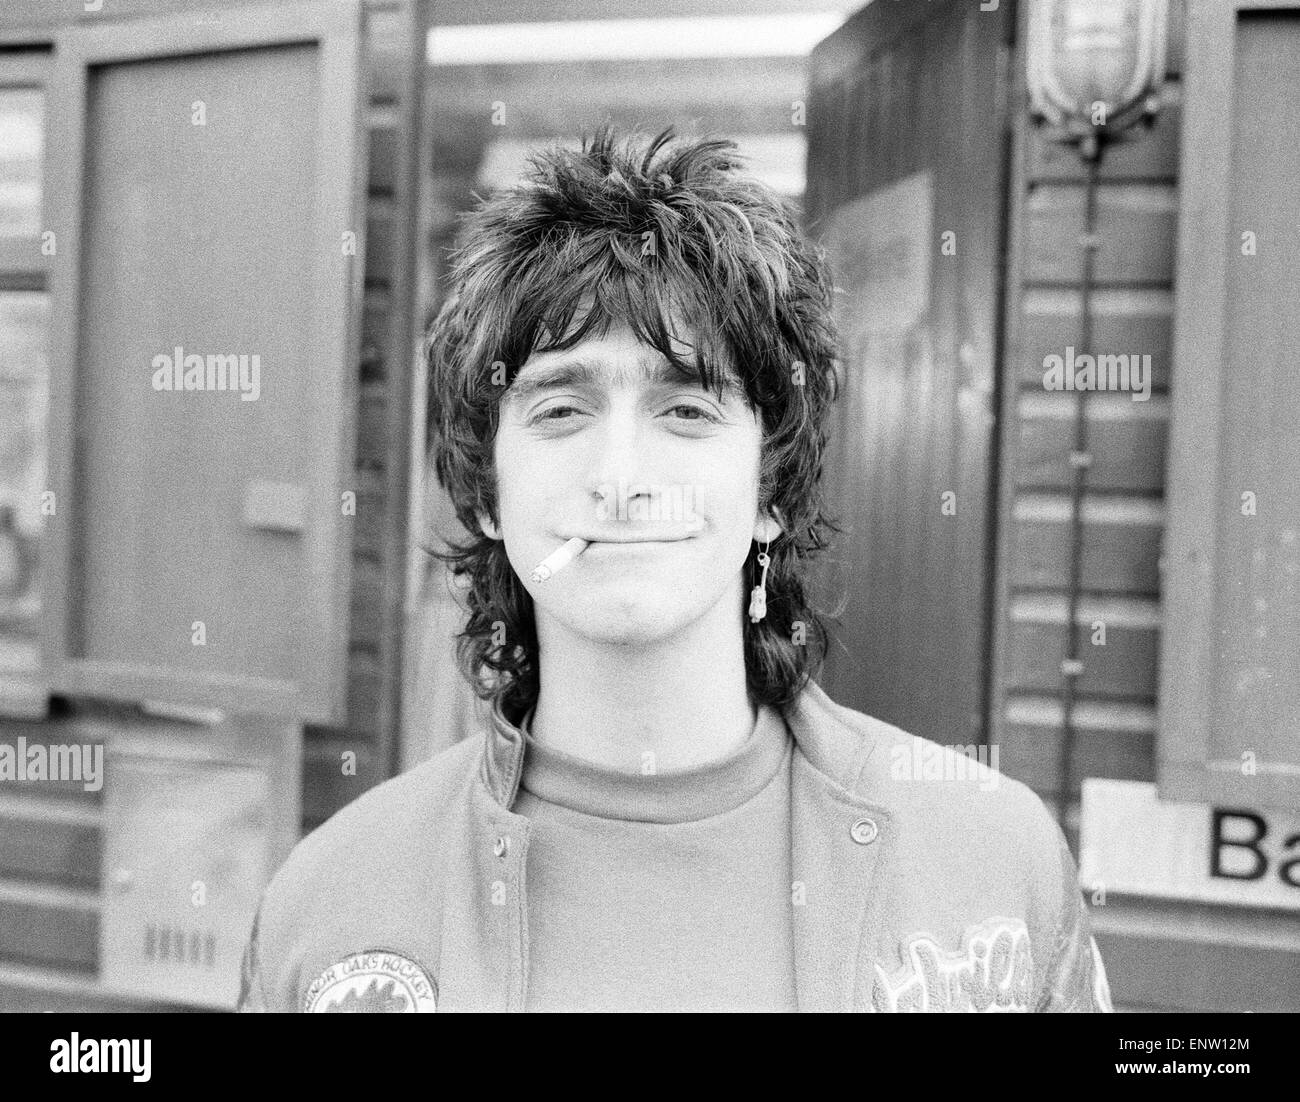 Gary Holton Actor Auf Wiedersehen Pet, television programme, being filmed at Central TV's Elstree Studios, October 1982. The comedy series is about a team of British bricklayers working in Germany. Pictured: actor Gary Holton Stock Photo